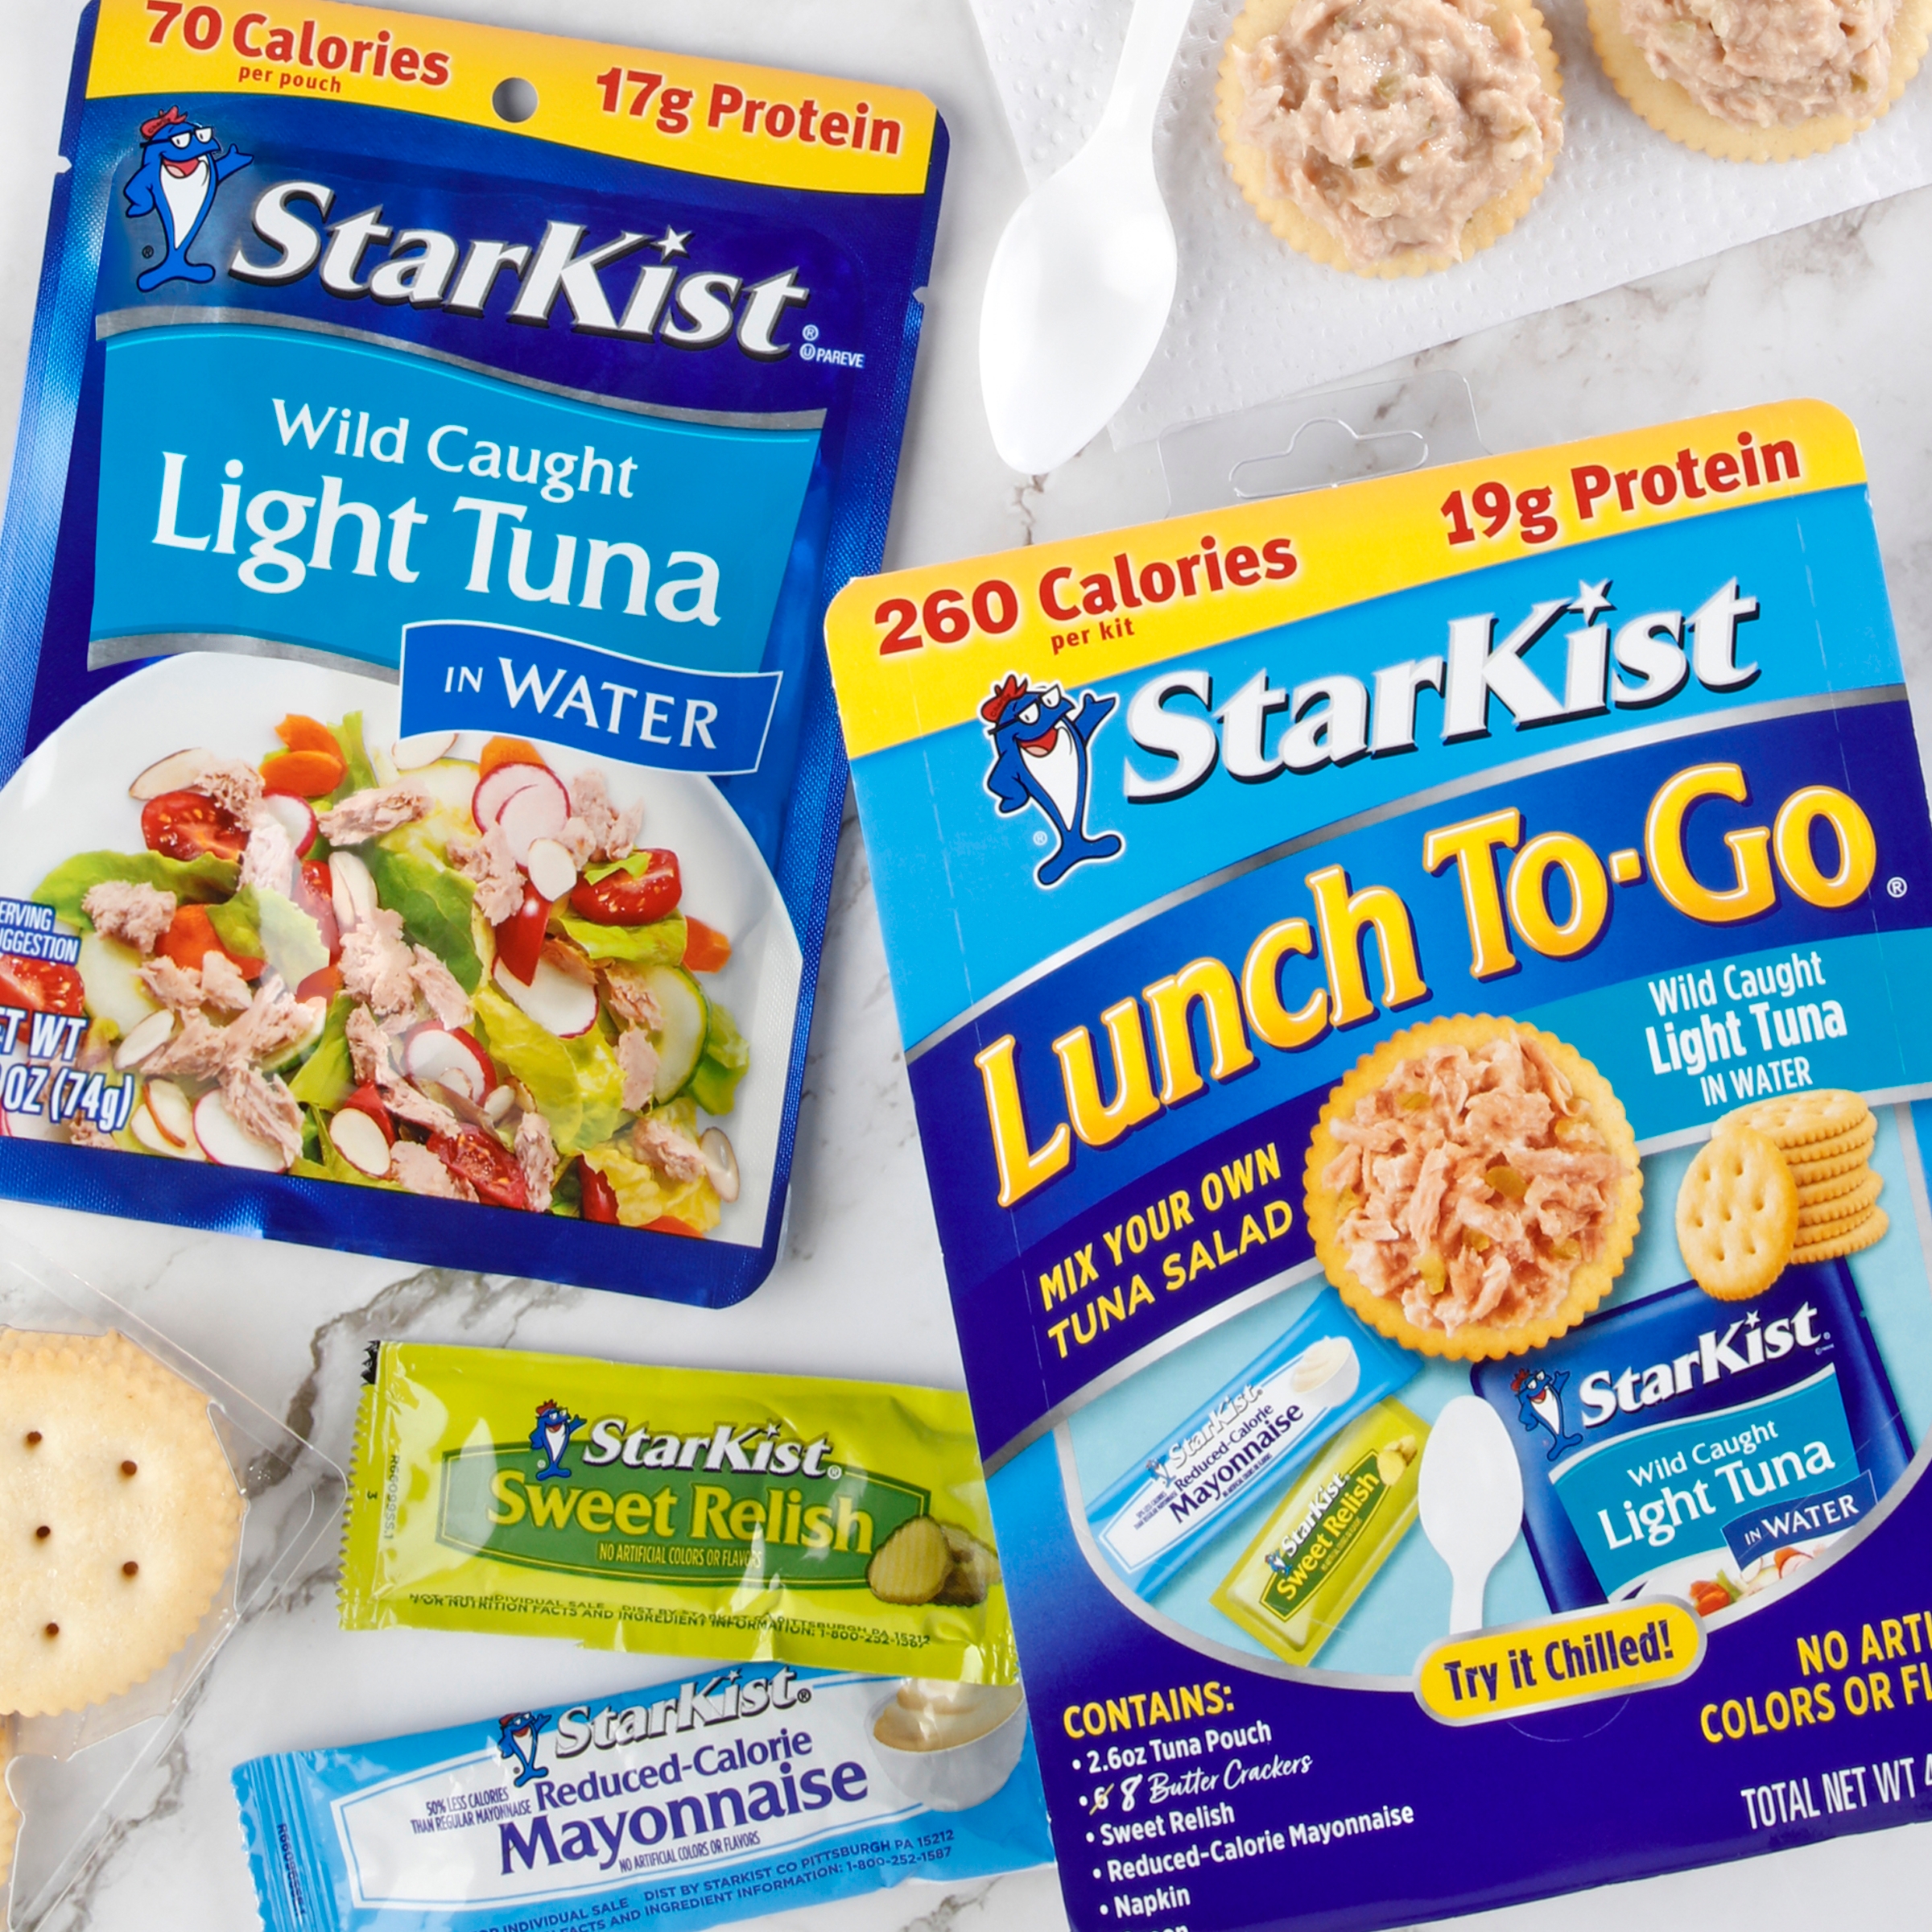 StarKist Lunch to-Go Chunk Light Tuna in Water, Mix Your Own Tuna Salad, 4.1 oz Box - image 2 of 6